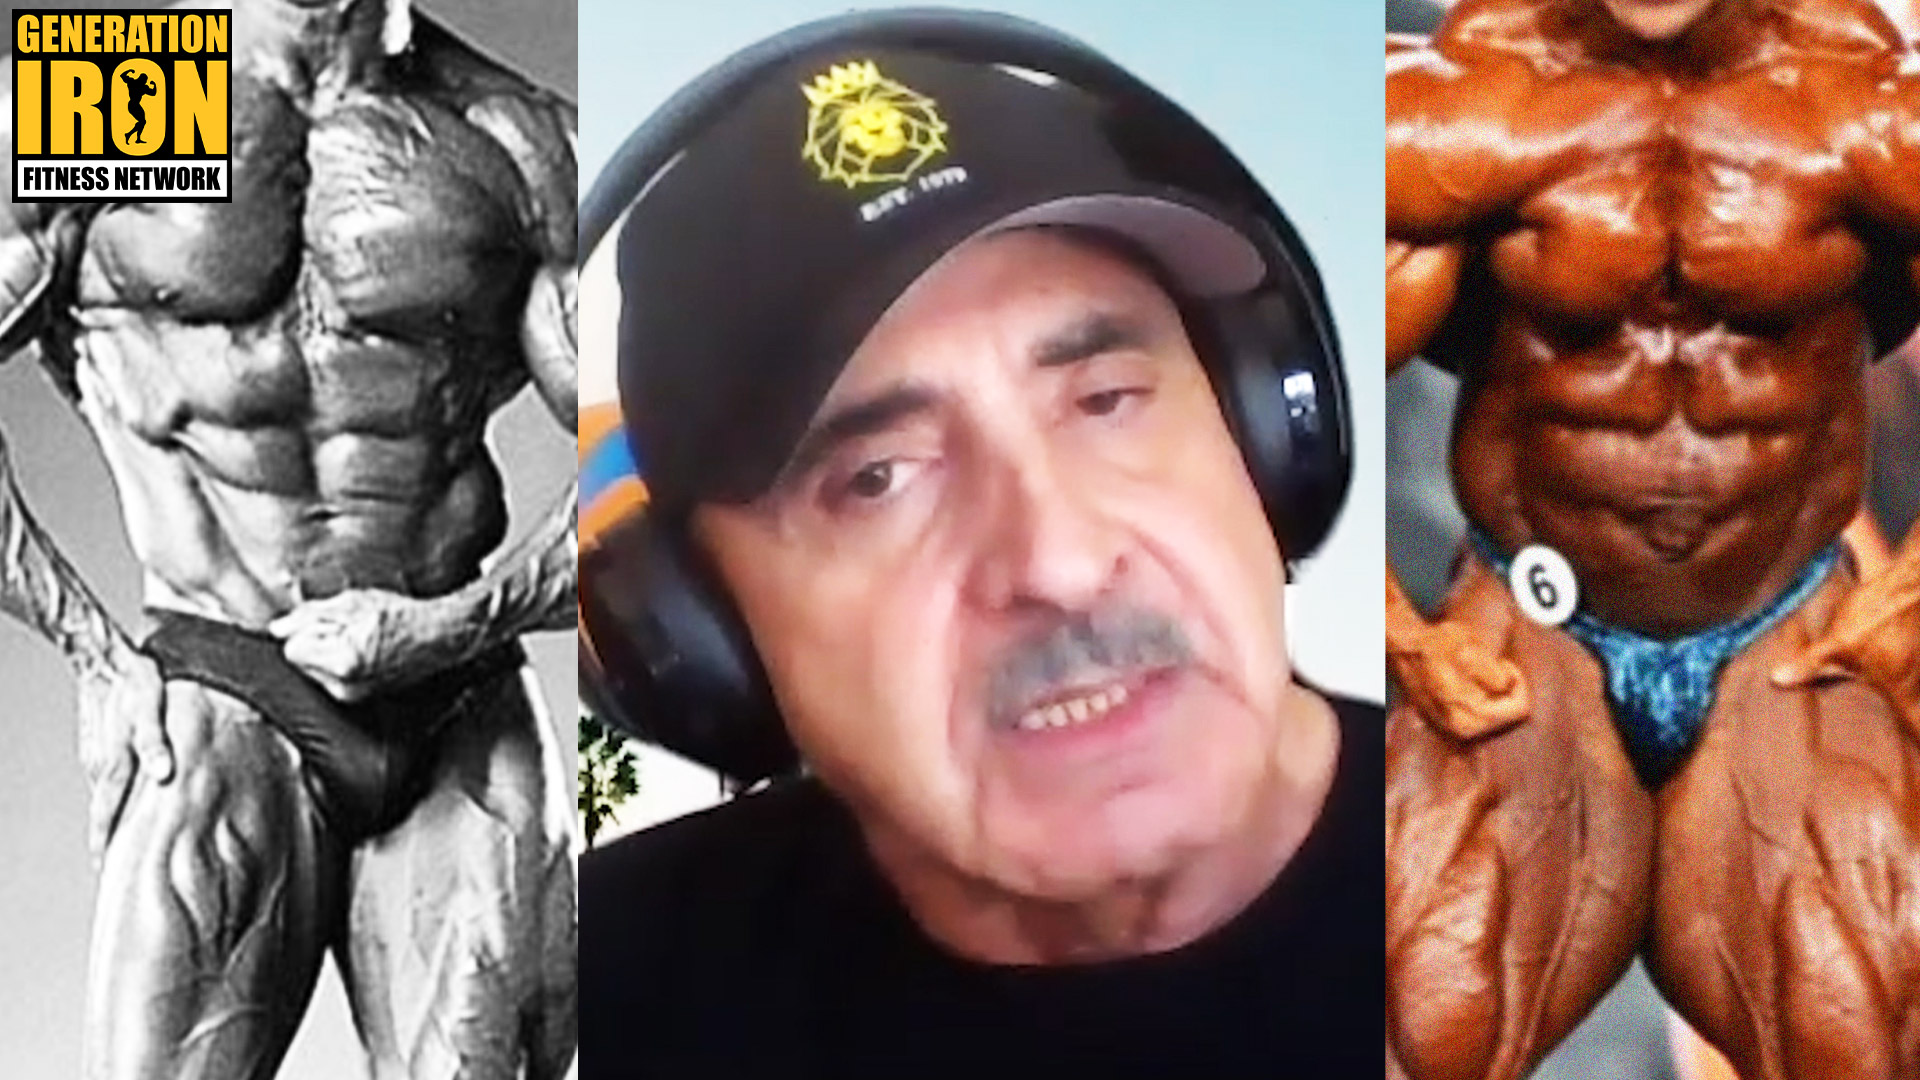 Samir Bannout: Some Beauty Is Lost When Bodybuilders Become Super Massive